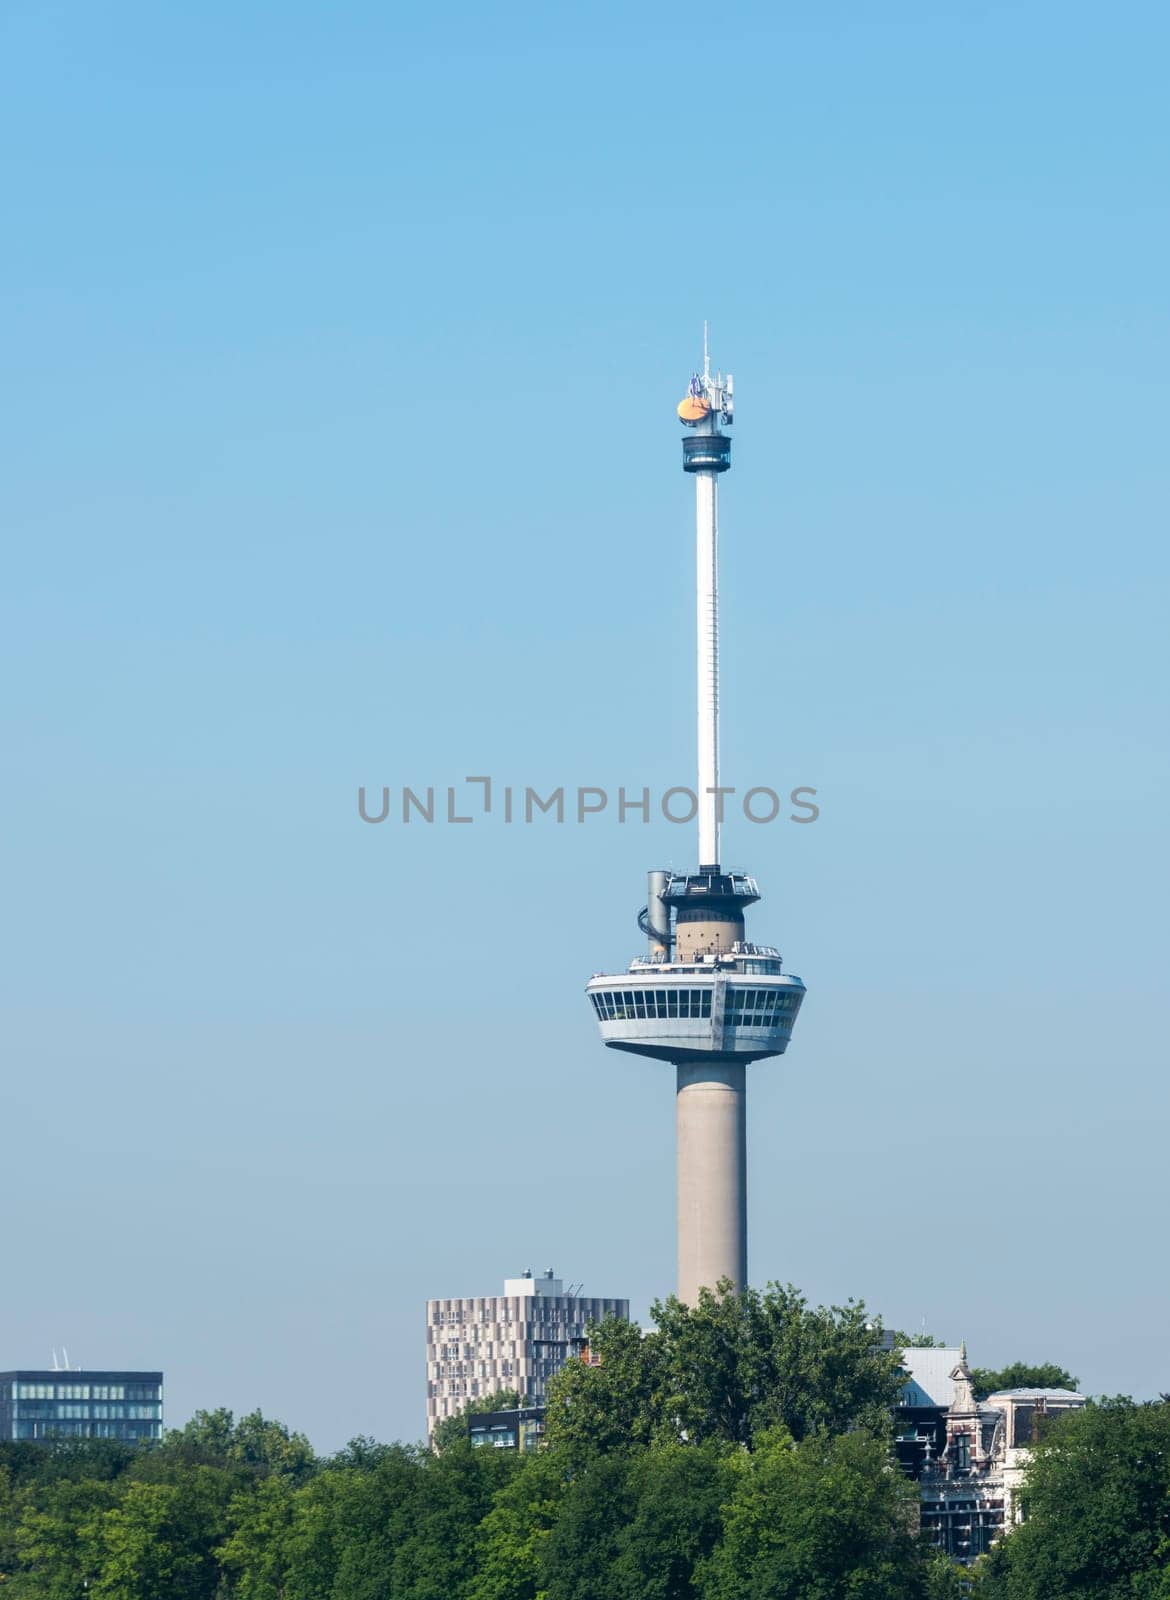 euromast tower in the dutch city of Rotterdam